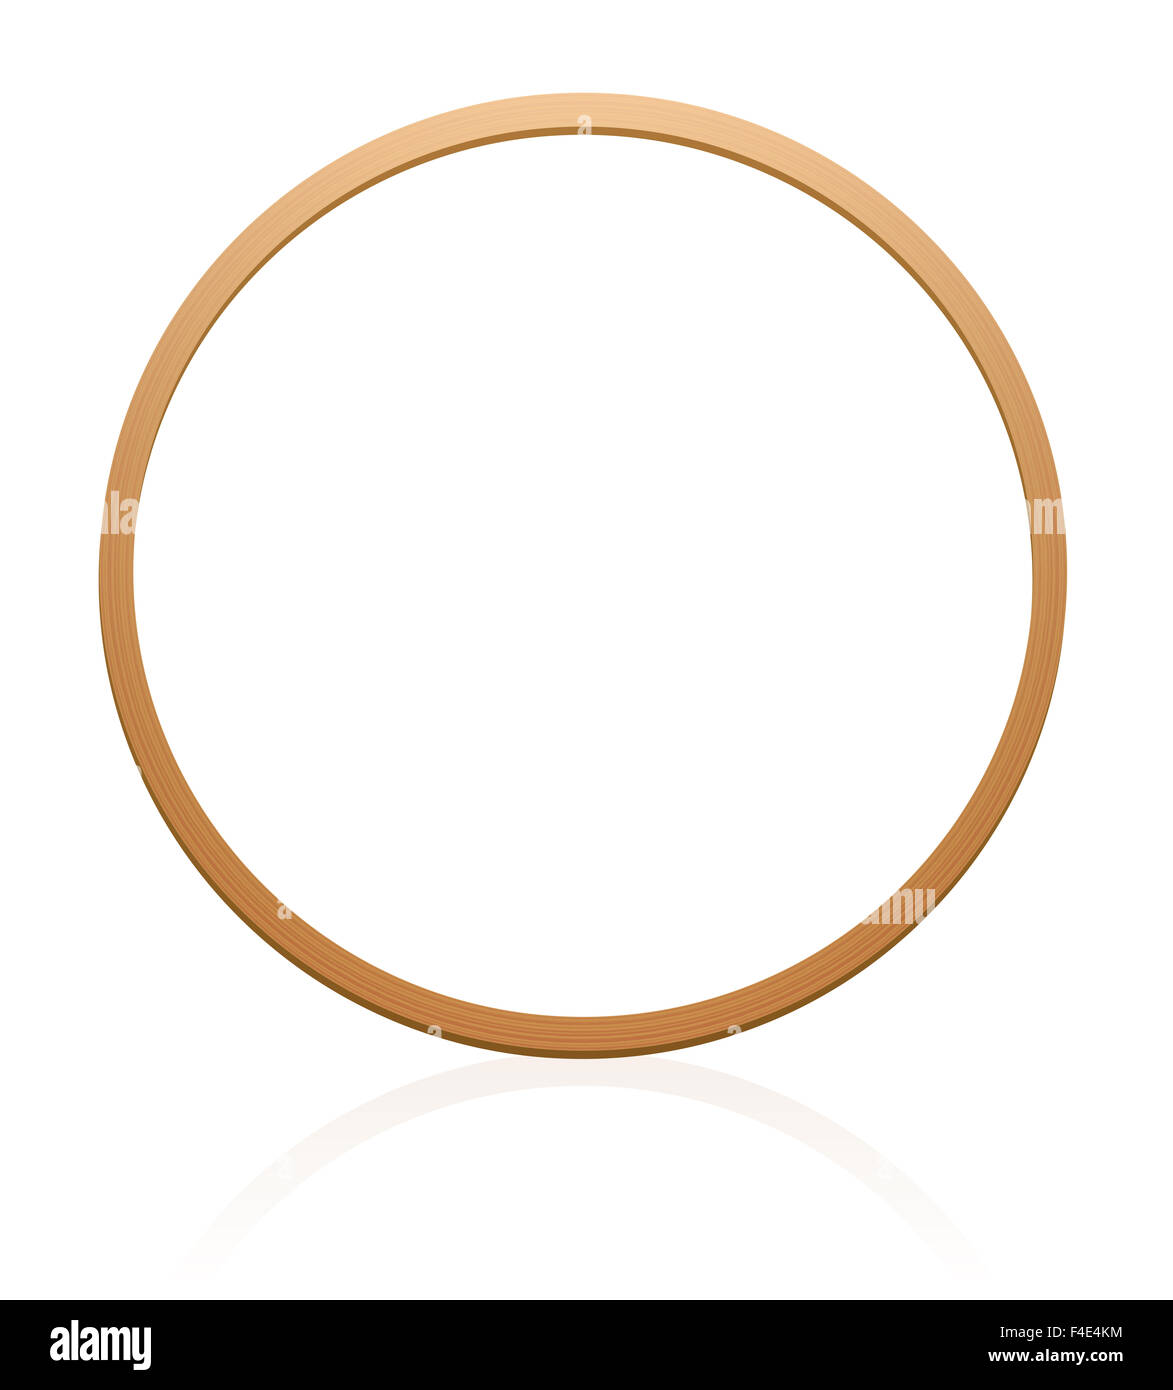 Gymnastic hoop with wood texture. Illustration over white background. Stock Photo